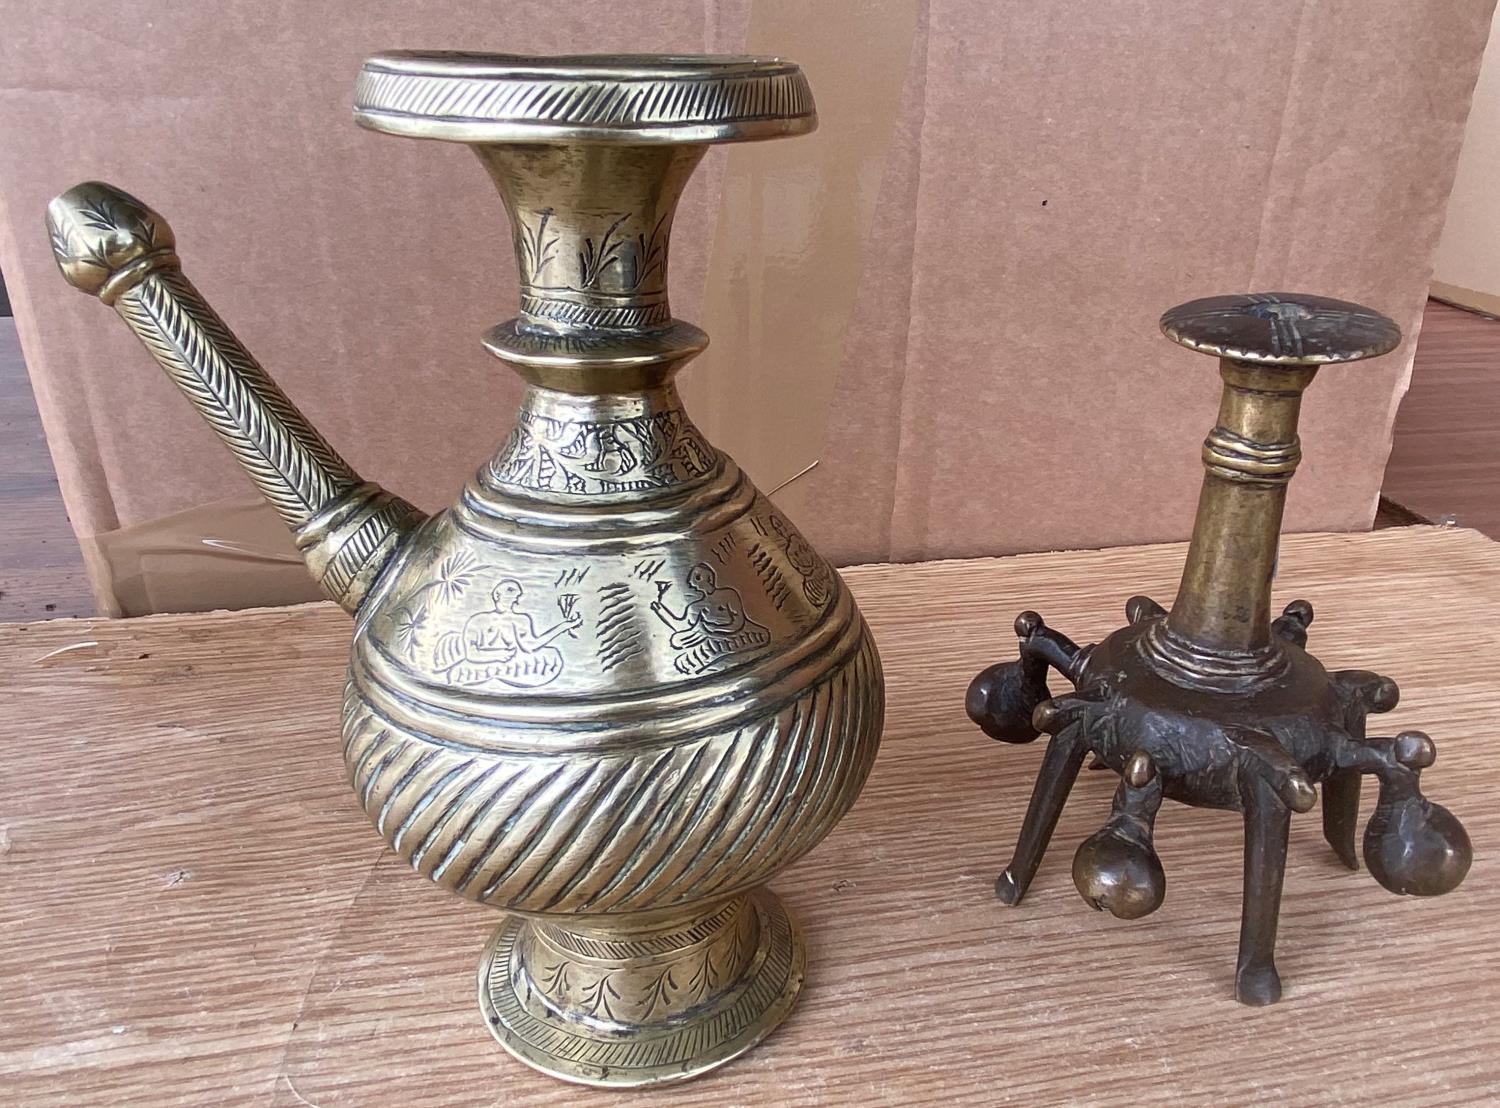 An Indian bronze water pourer and an Indian bronze bell stand